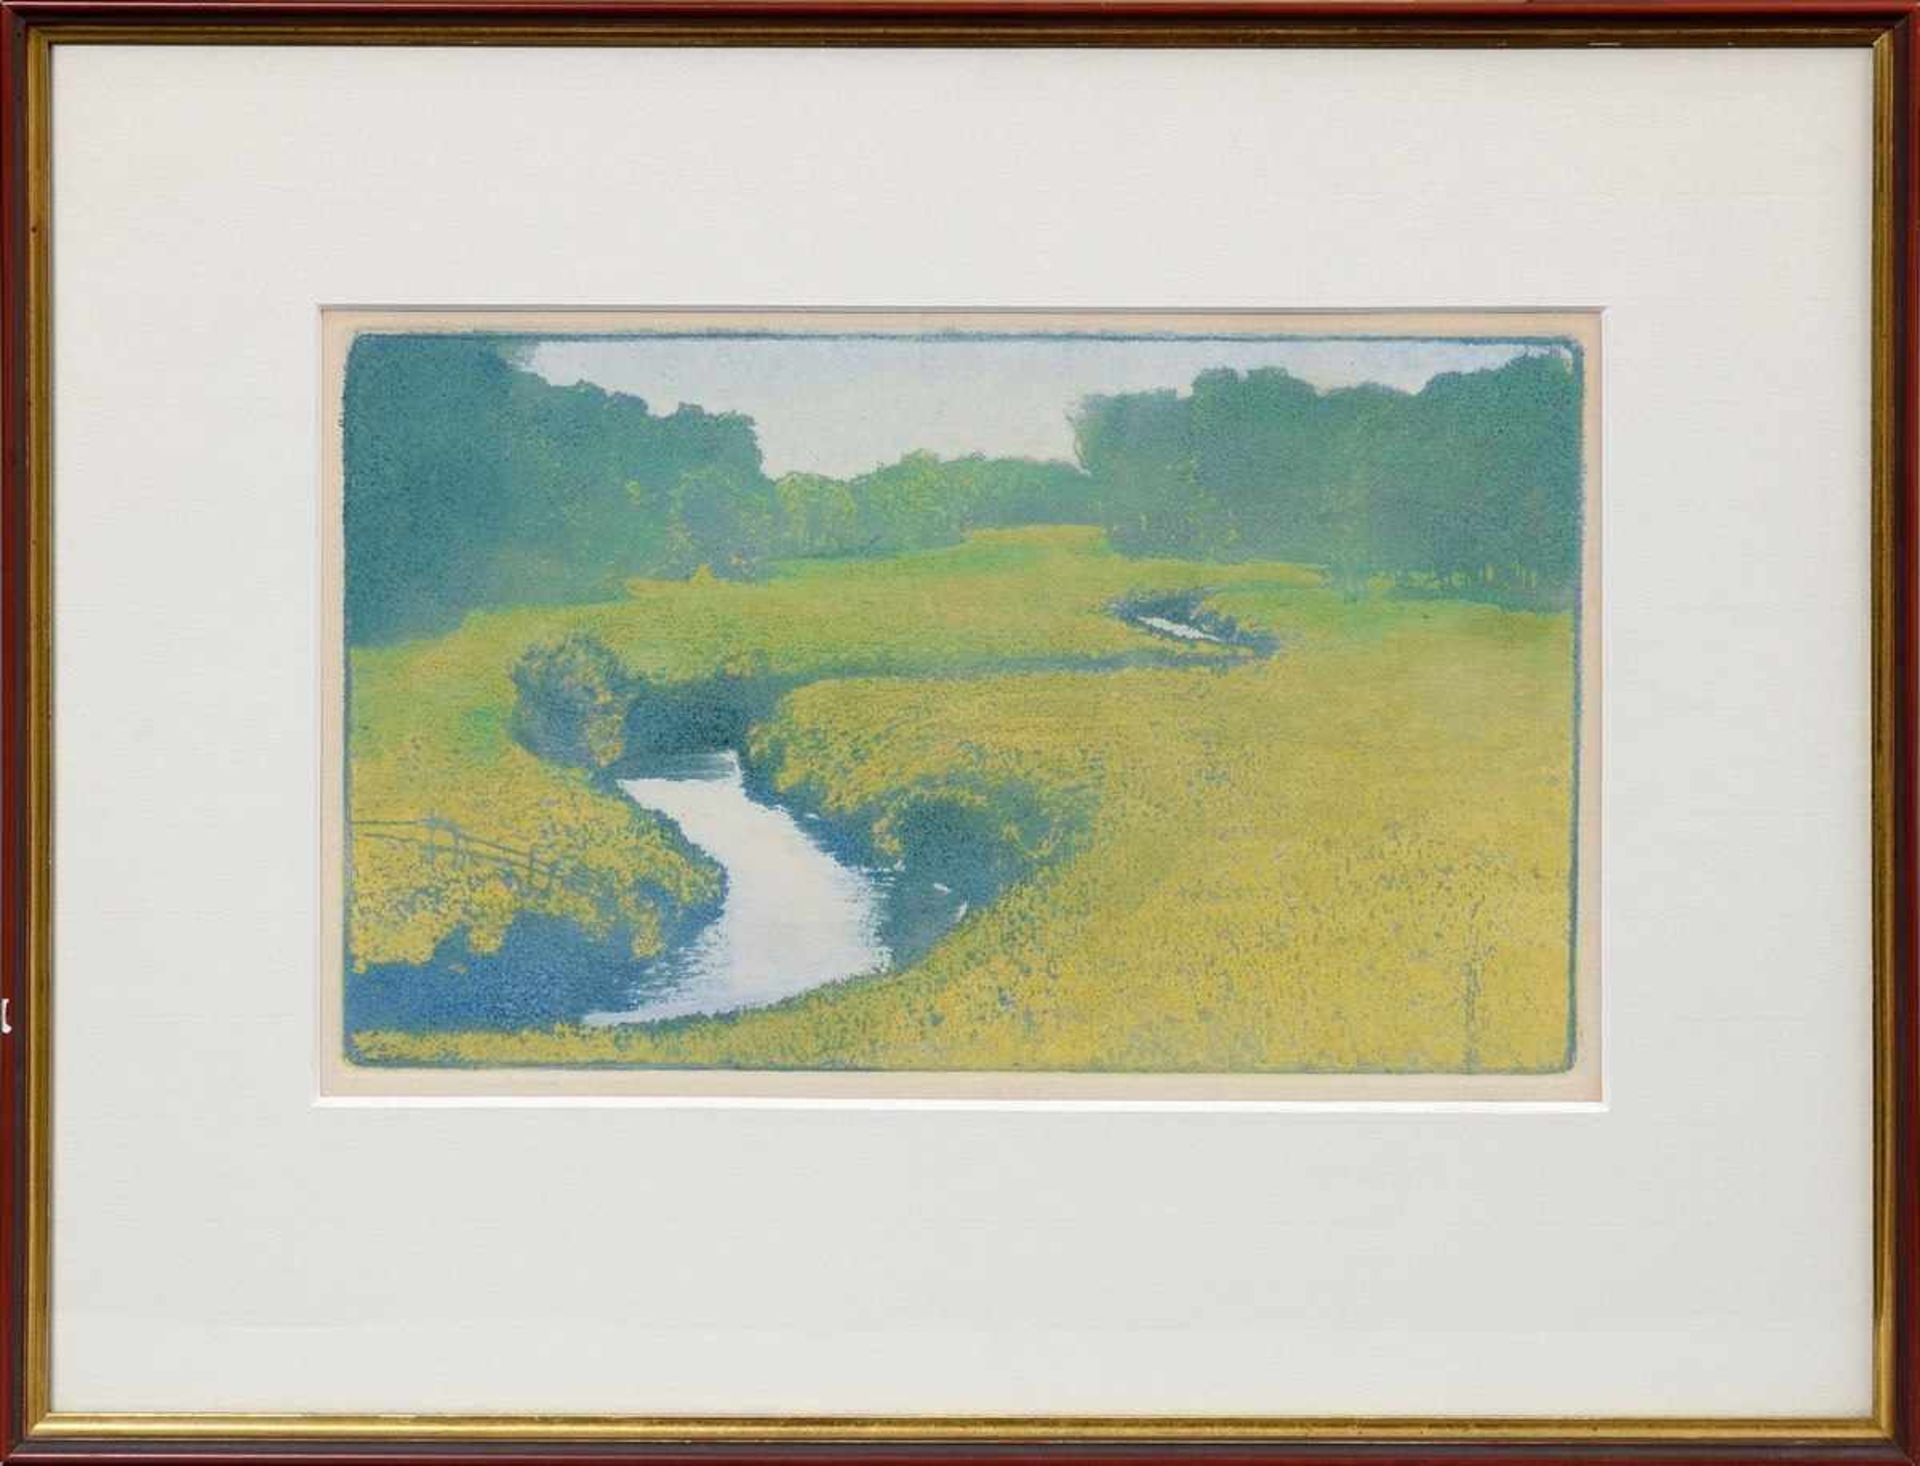 Ilies, Arthur (1870-1952) "Oberalster", Farblithographie, unsign., 19x32cm (m.R. 38x49cm)Ilies, - Image 2 of 2